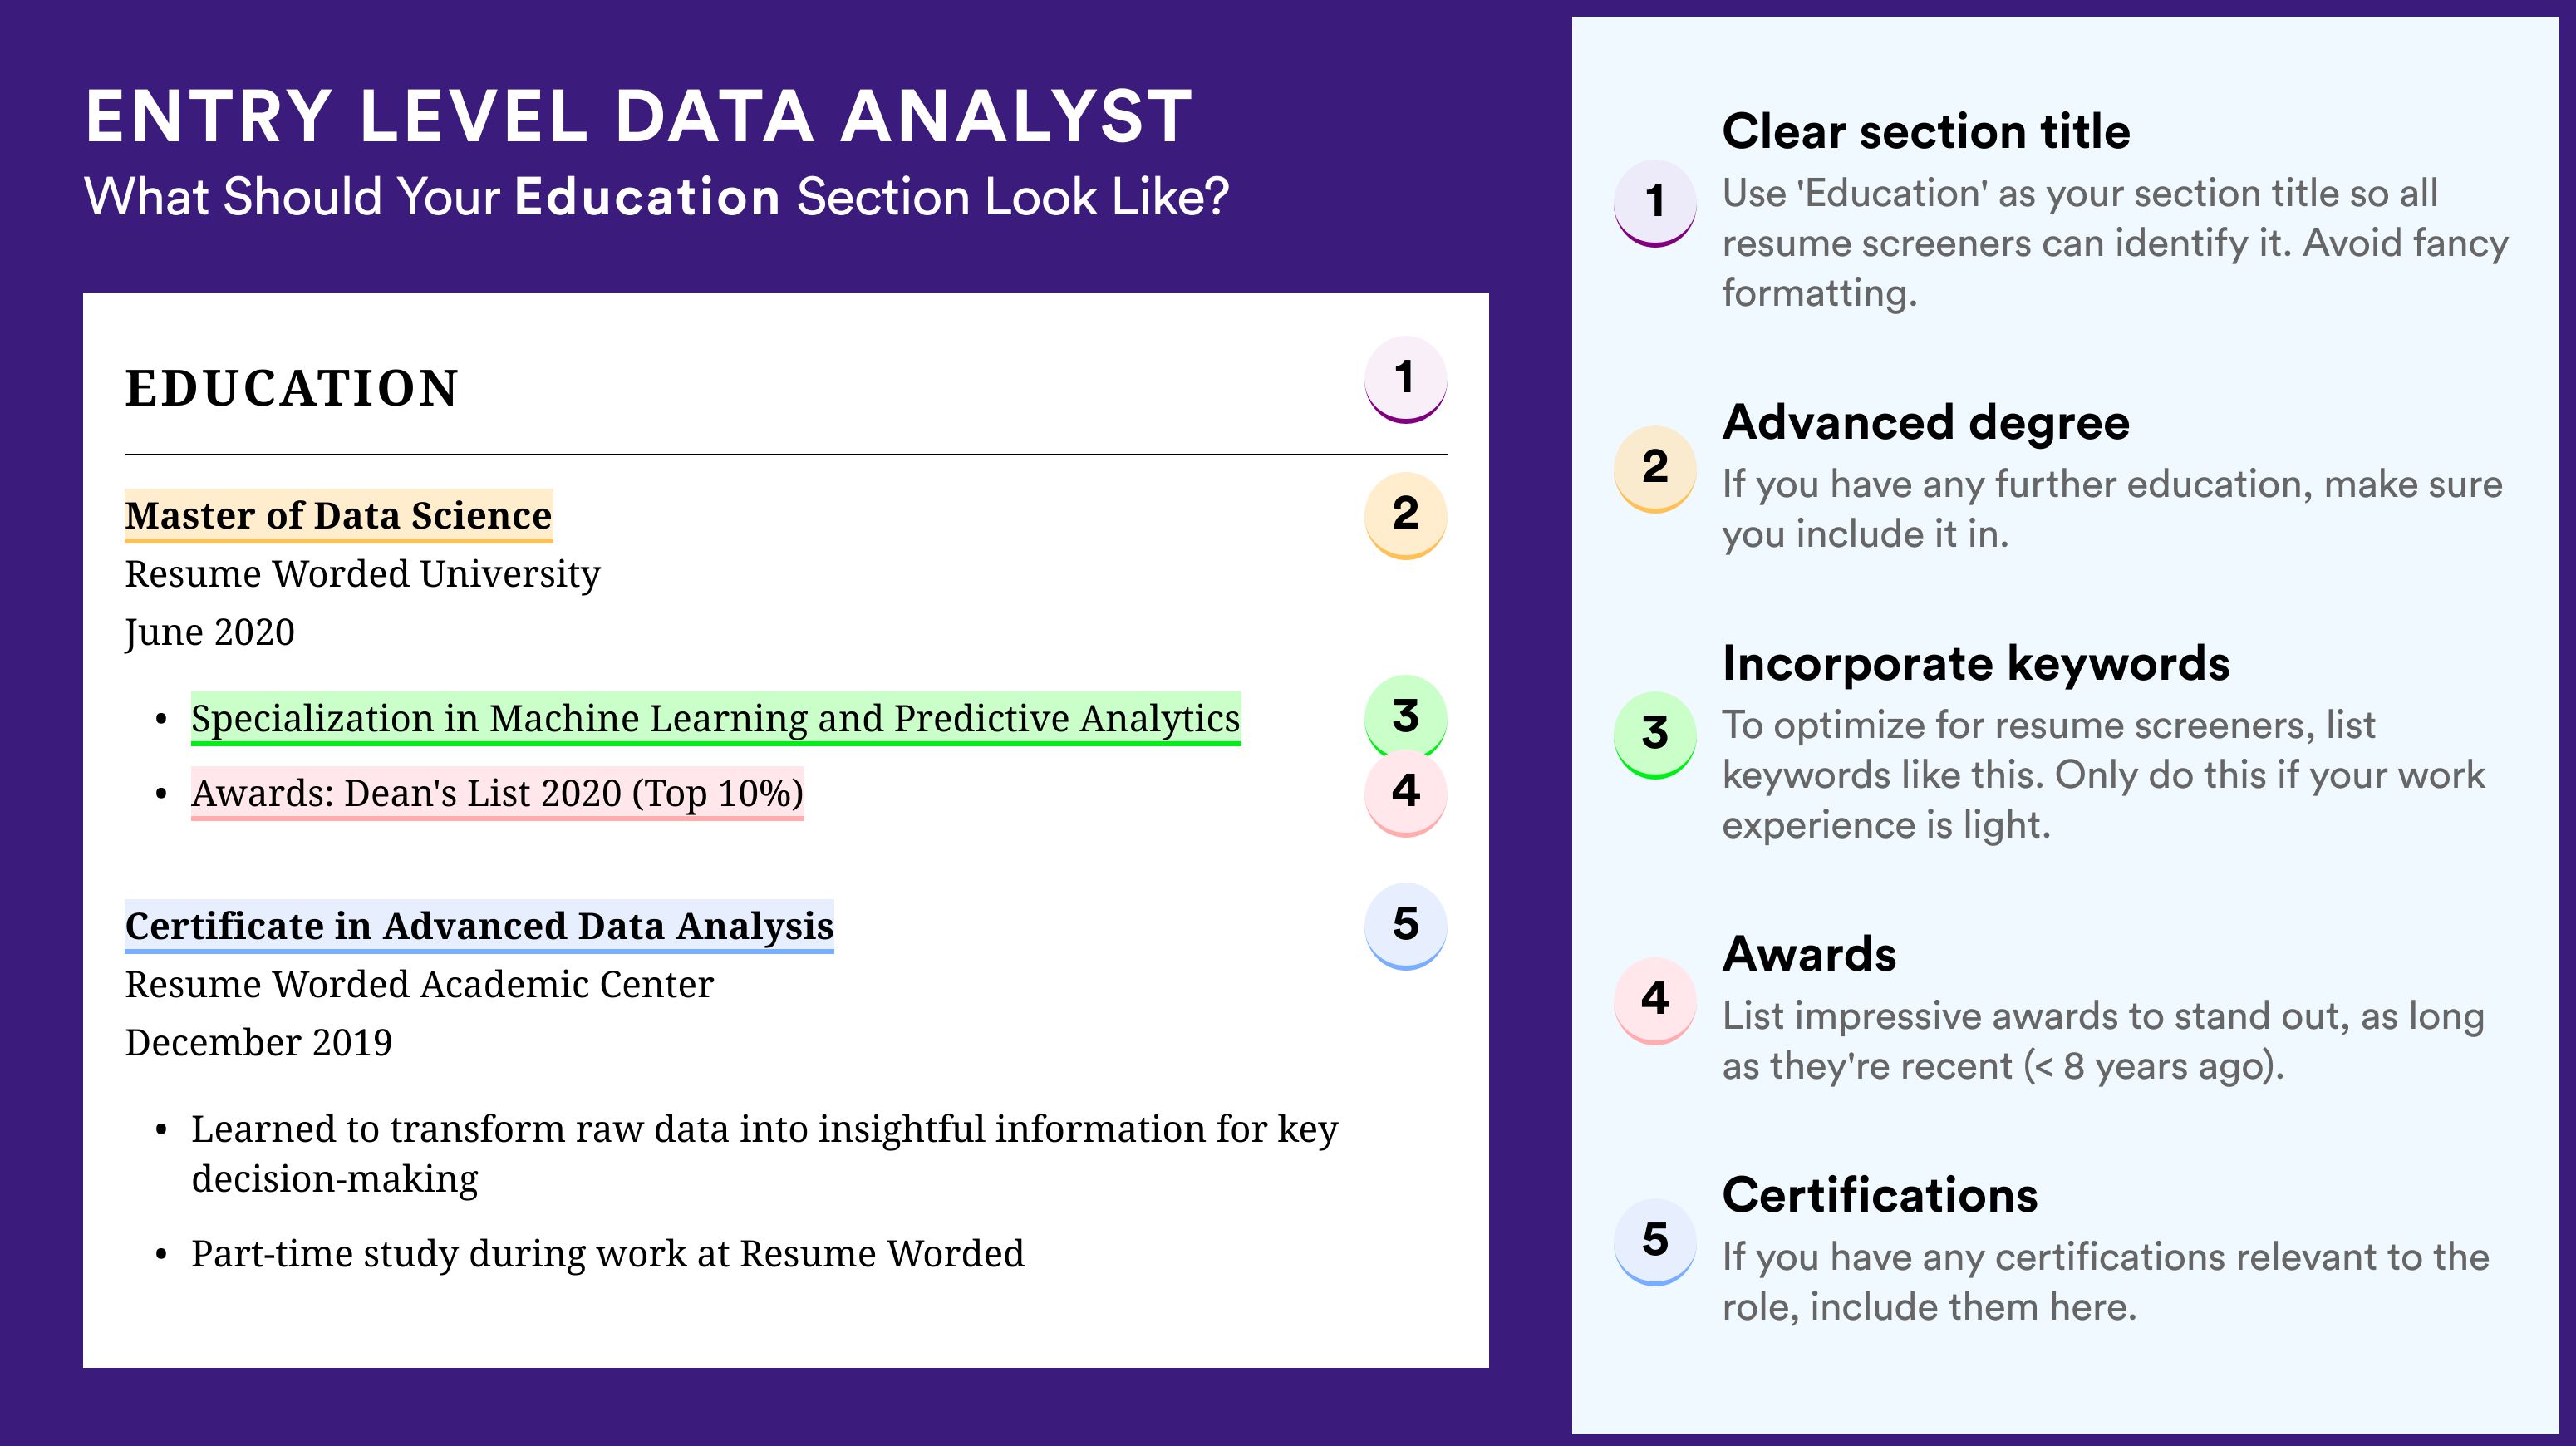 How To Write An Education Section - Entry Level Data Analyst Roles